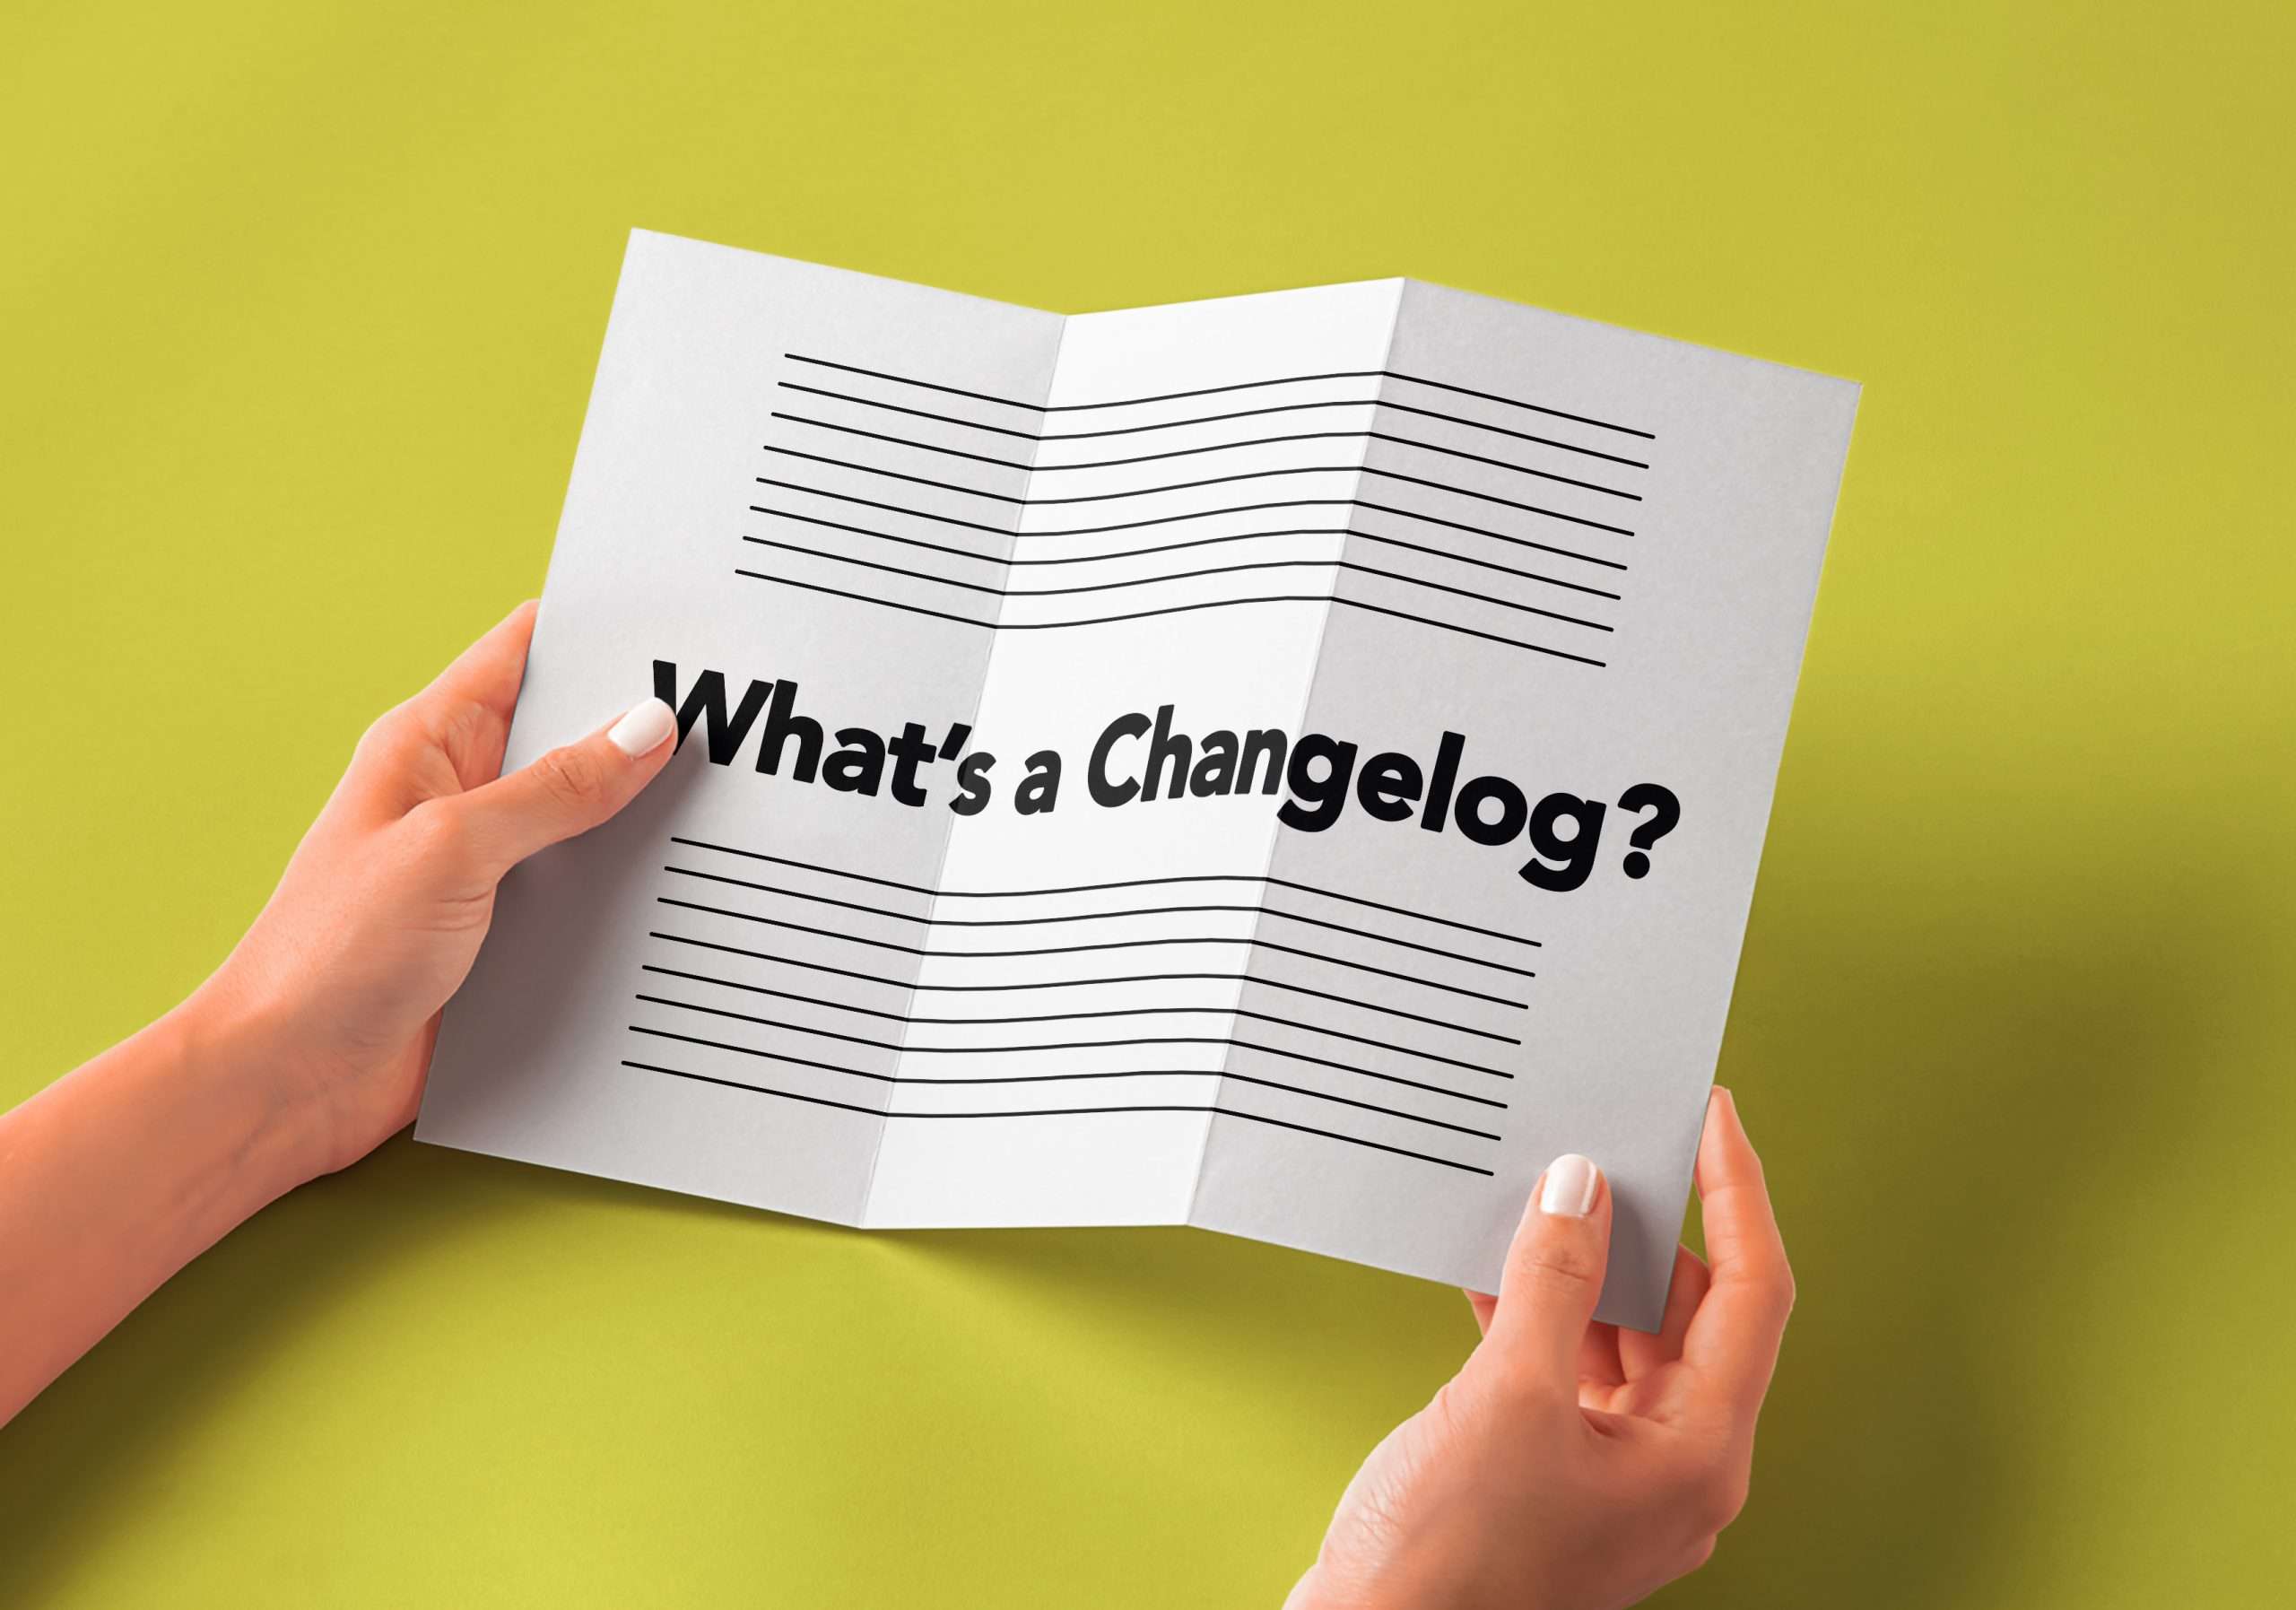 What is a Changelog and what are Its Benefits?